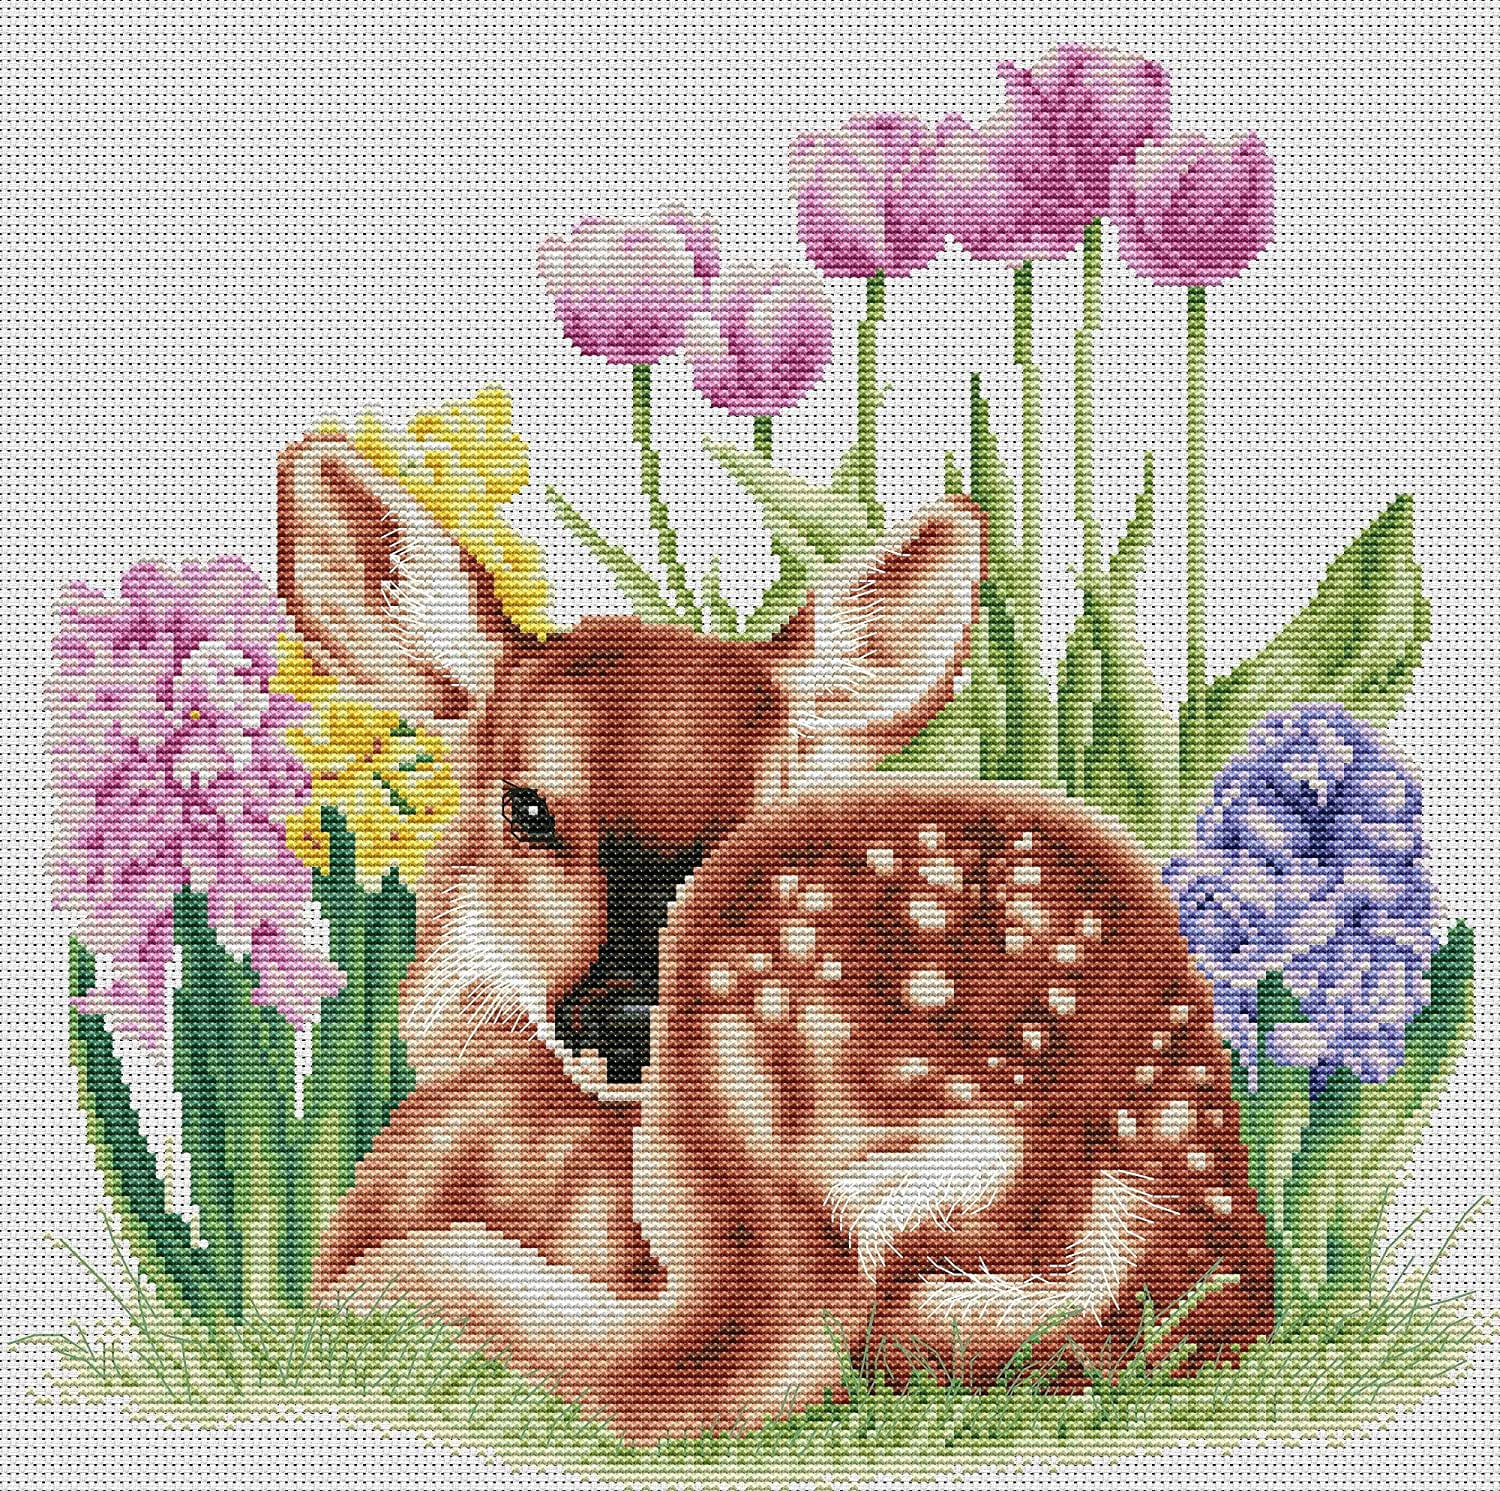 Maydear Cross Stitch Kits Stamped Full Range of Embroidery Starter Kits for Beginners DIY 14 CT 2 Strands Fawn Among The Flowers